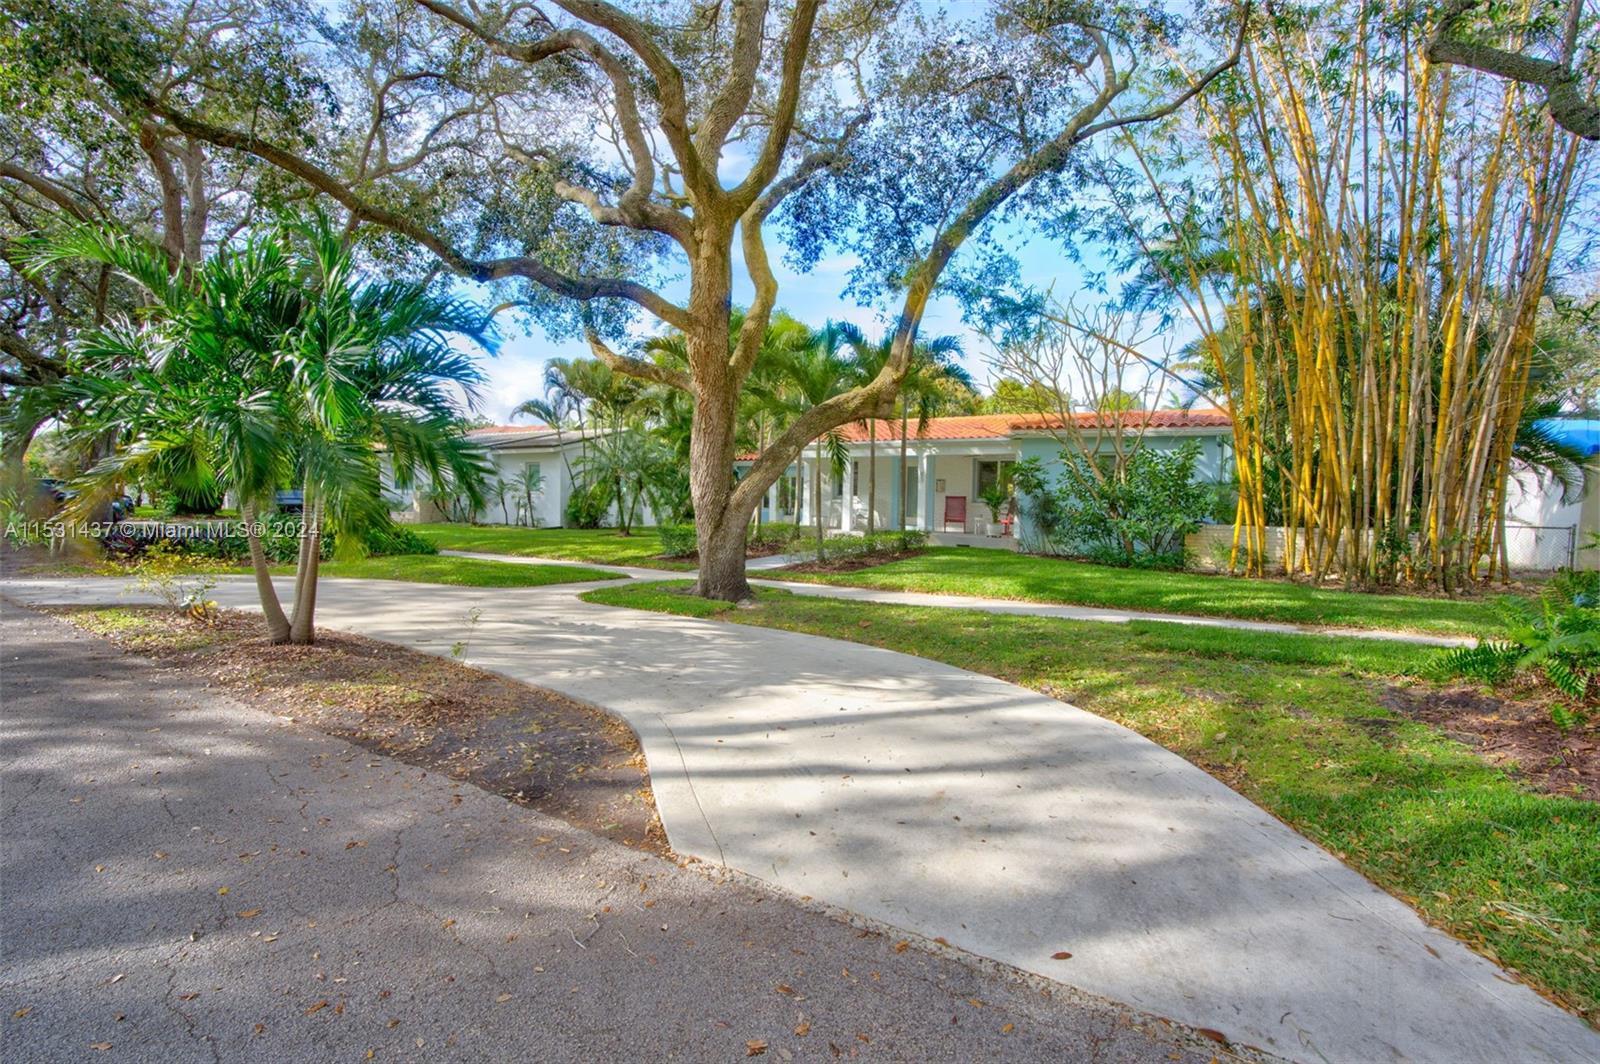 Prime opportunity to own a Miami Shores home with old-world charm & updated classic lines. Split-des